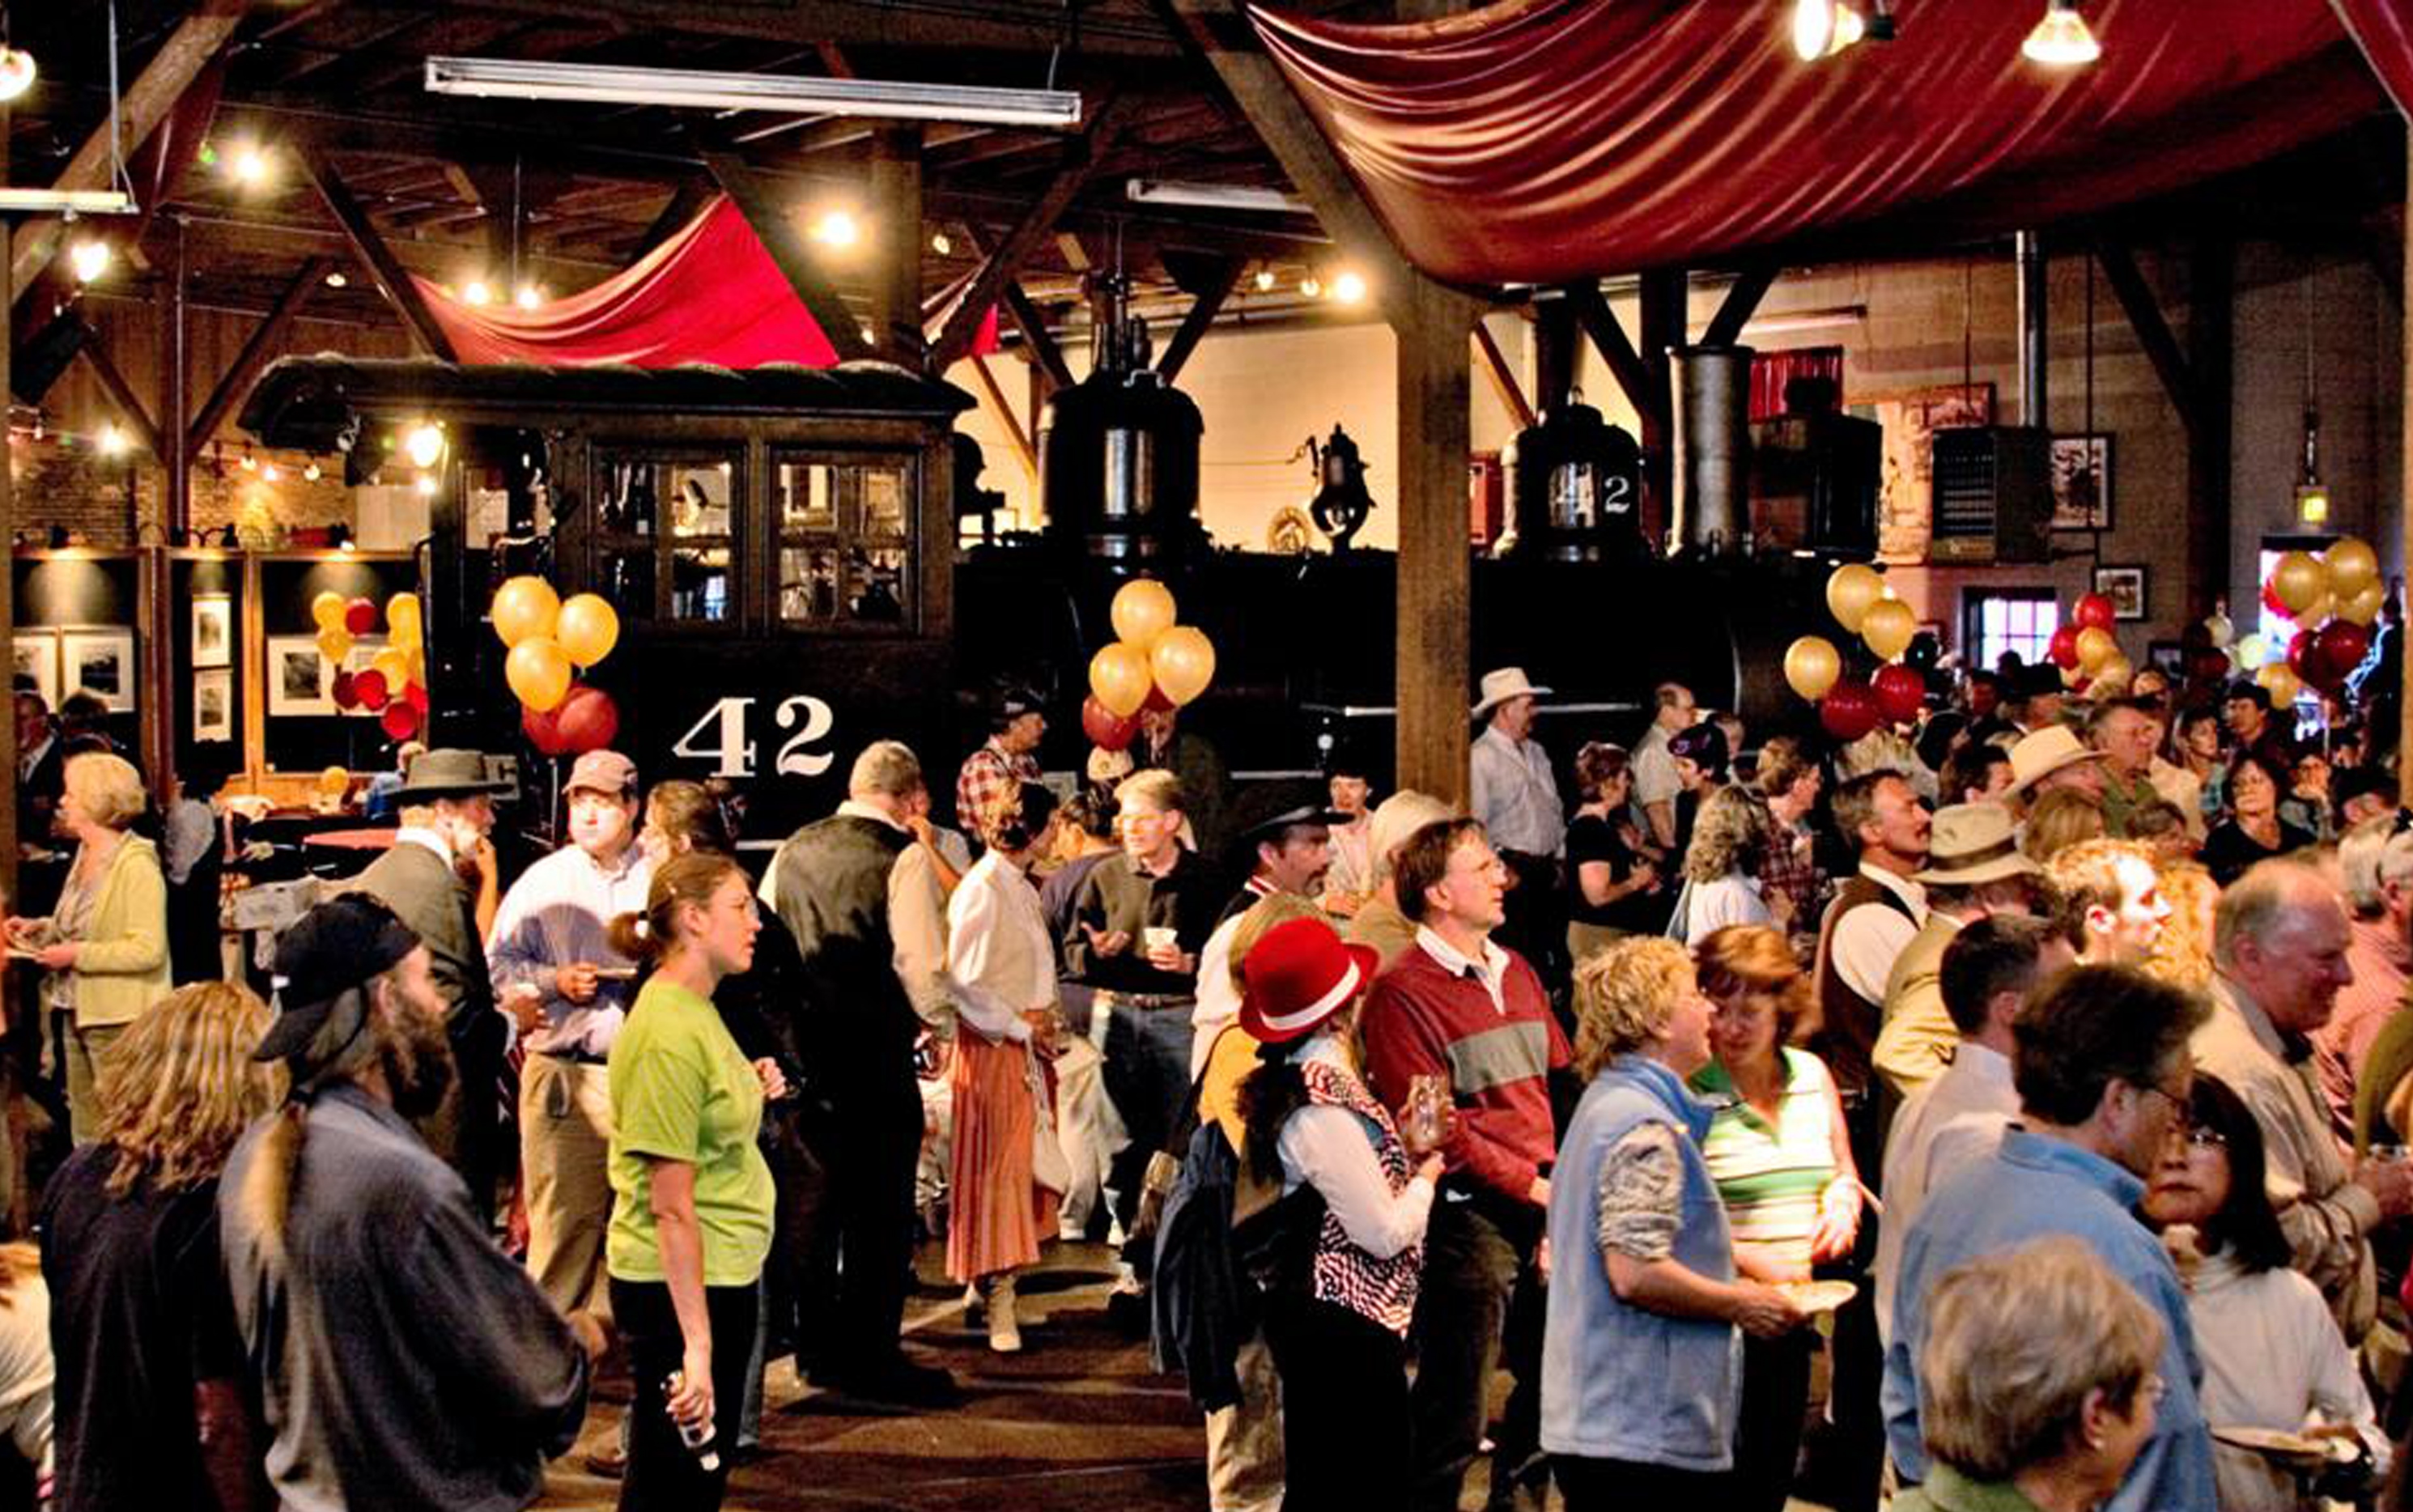 In 2006 the Durango and Silverton Railroad Roundhouse Museum served as the backdrop for Durango’s 125th anniversary celebration Founder’s Gala.